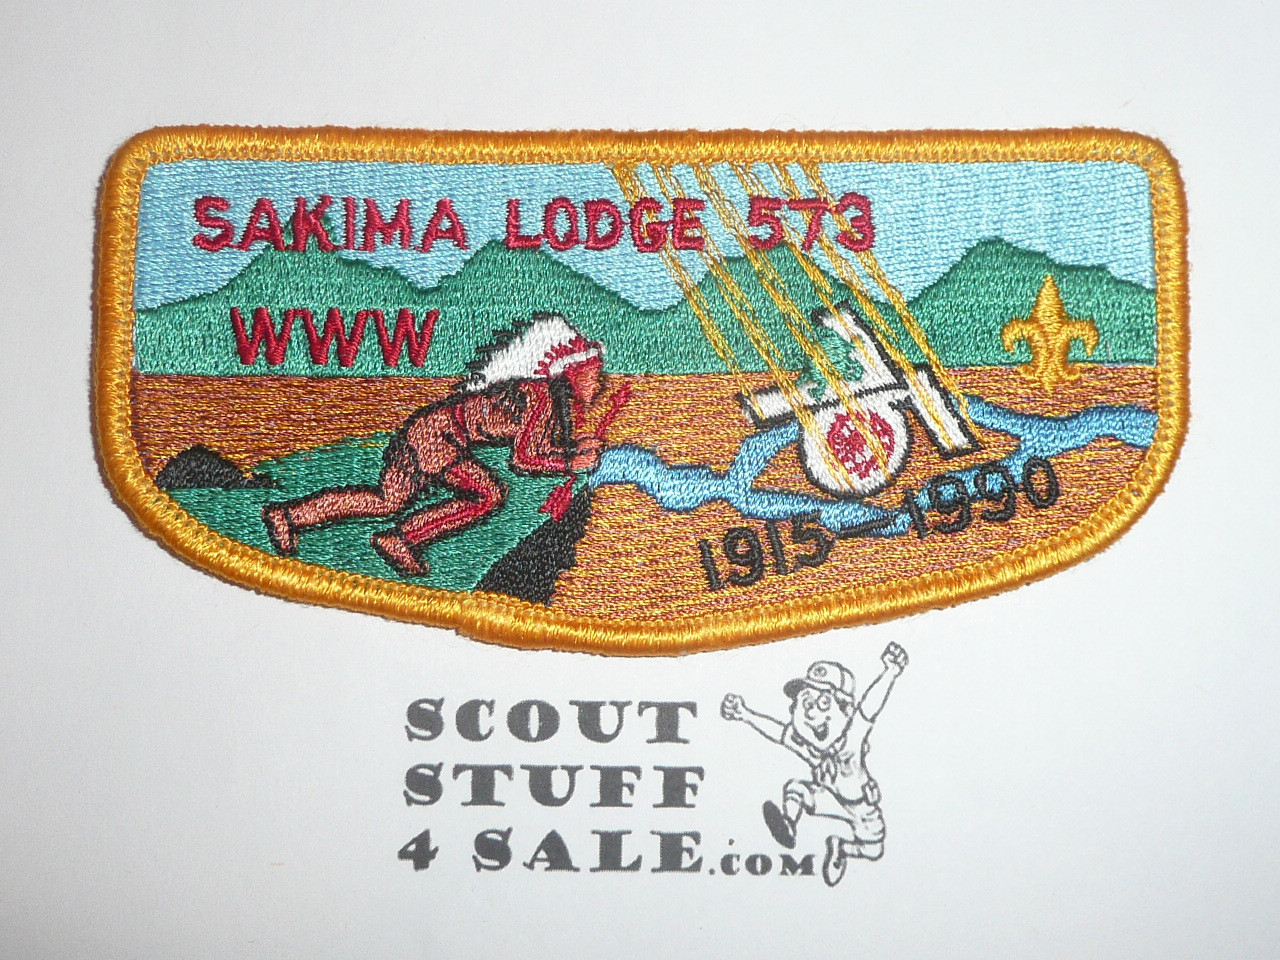 Order of the Arrow Lodge #573 Sakima s15 75th Anniversary Flap Patch